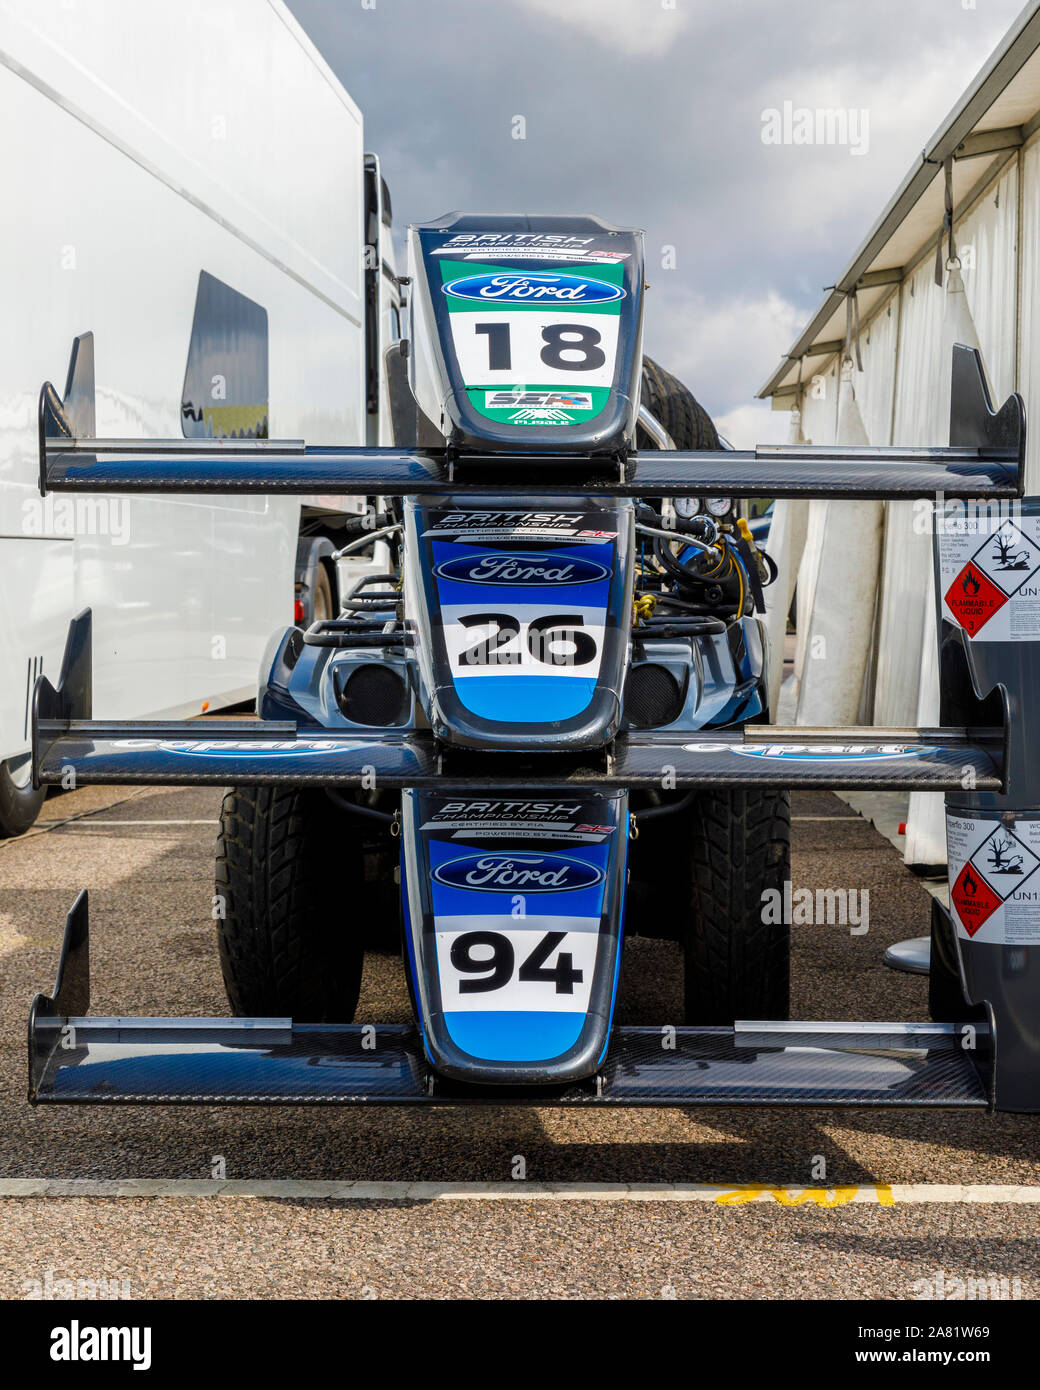 Double R Racing team nose-cones on a rack outside the paddock garage at the 2019 BTCC meeting at Snetterton, Norfolk, UK. Stock Photo